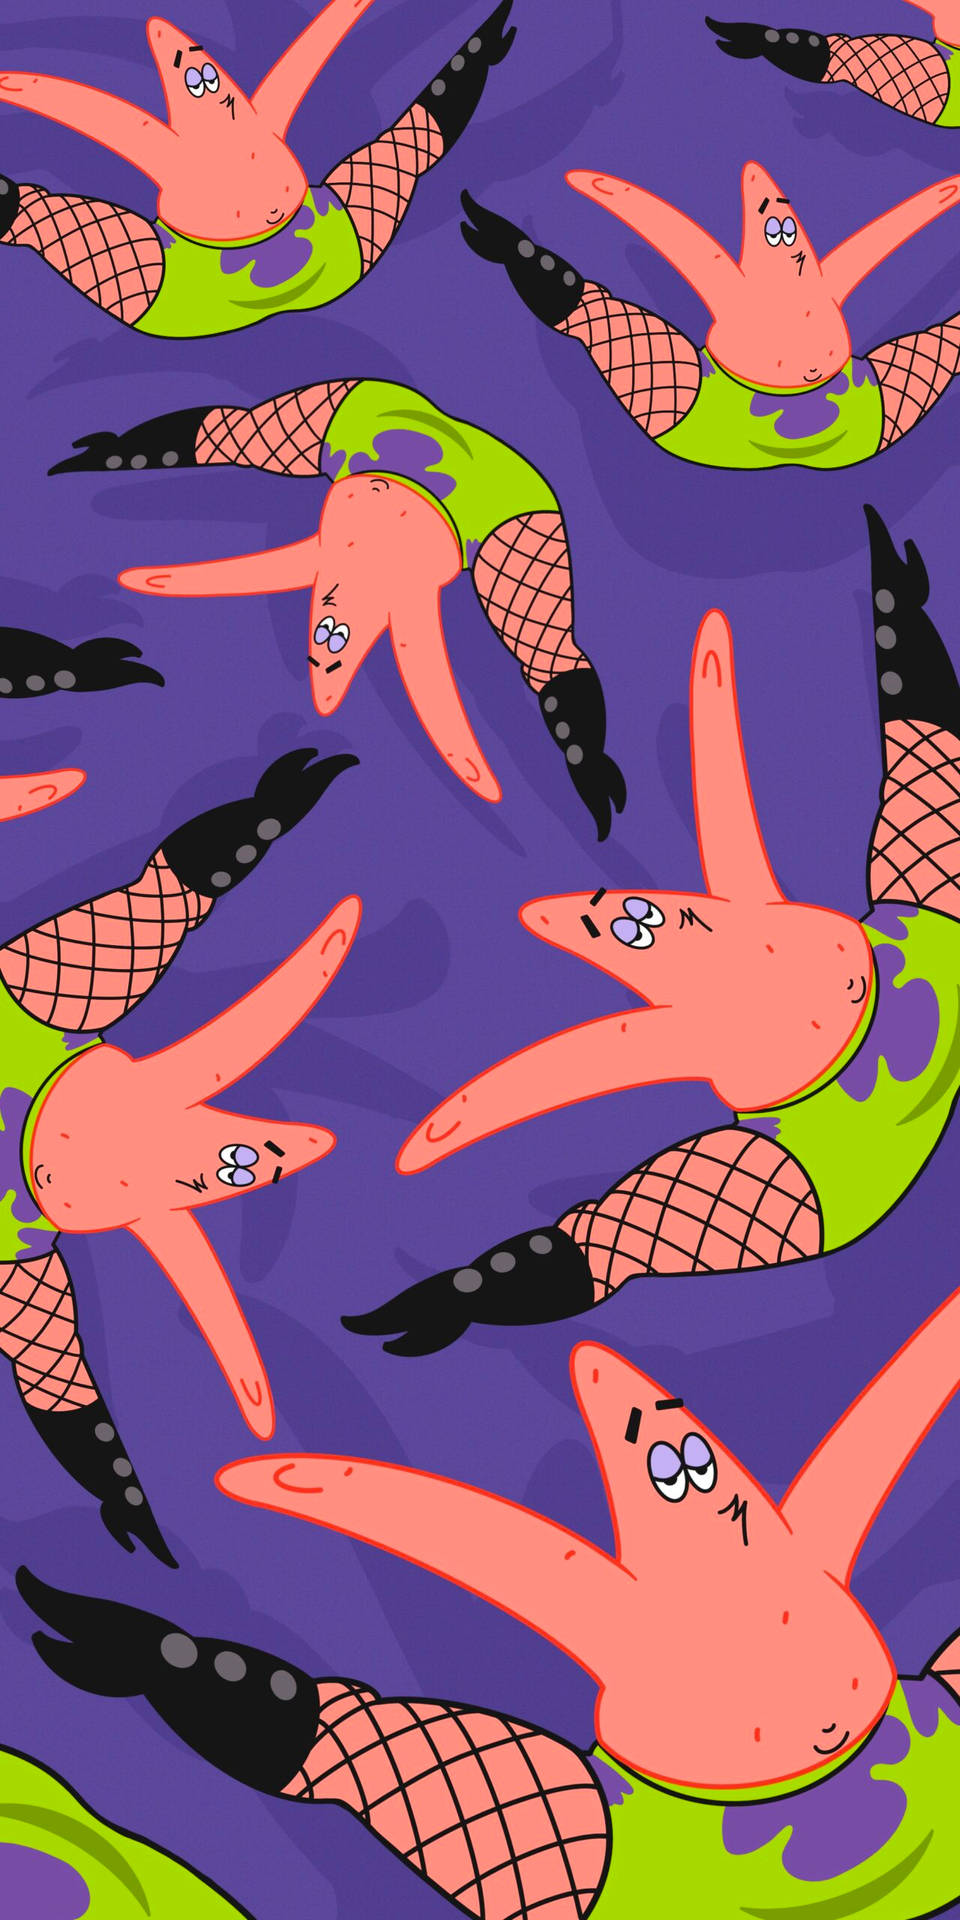 Patrick the starfish stuck in a surreal situation Wallpaper